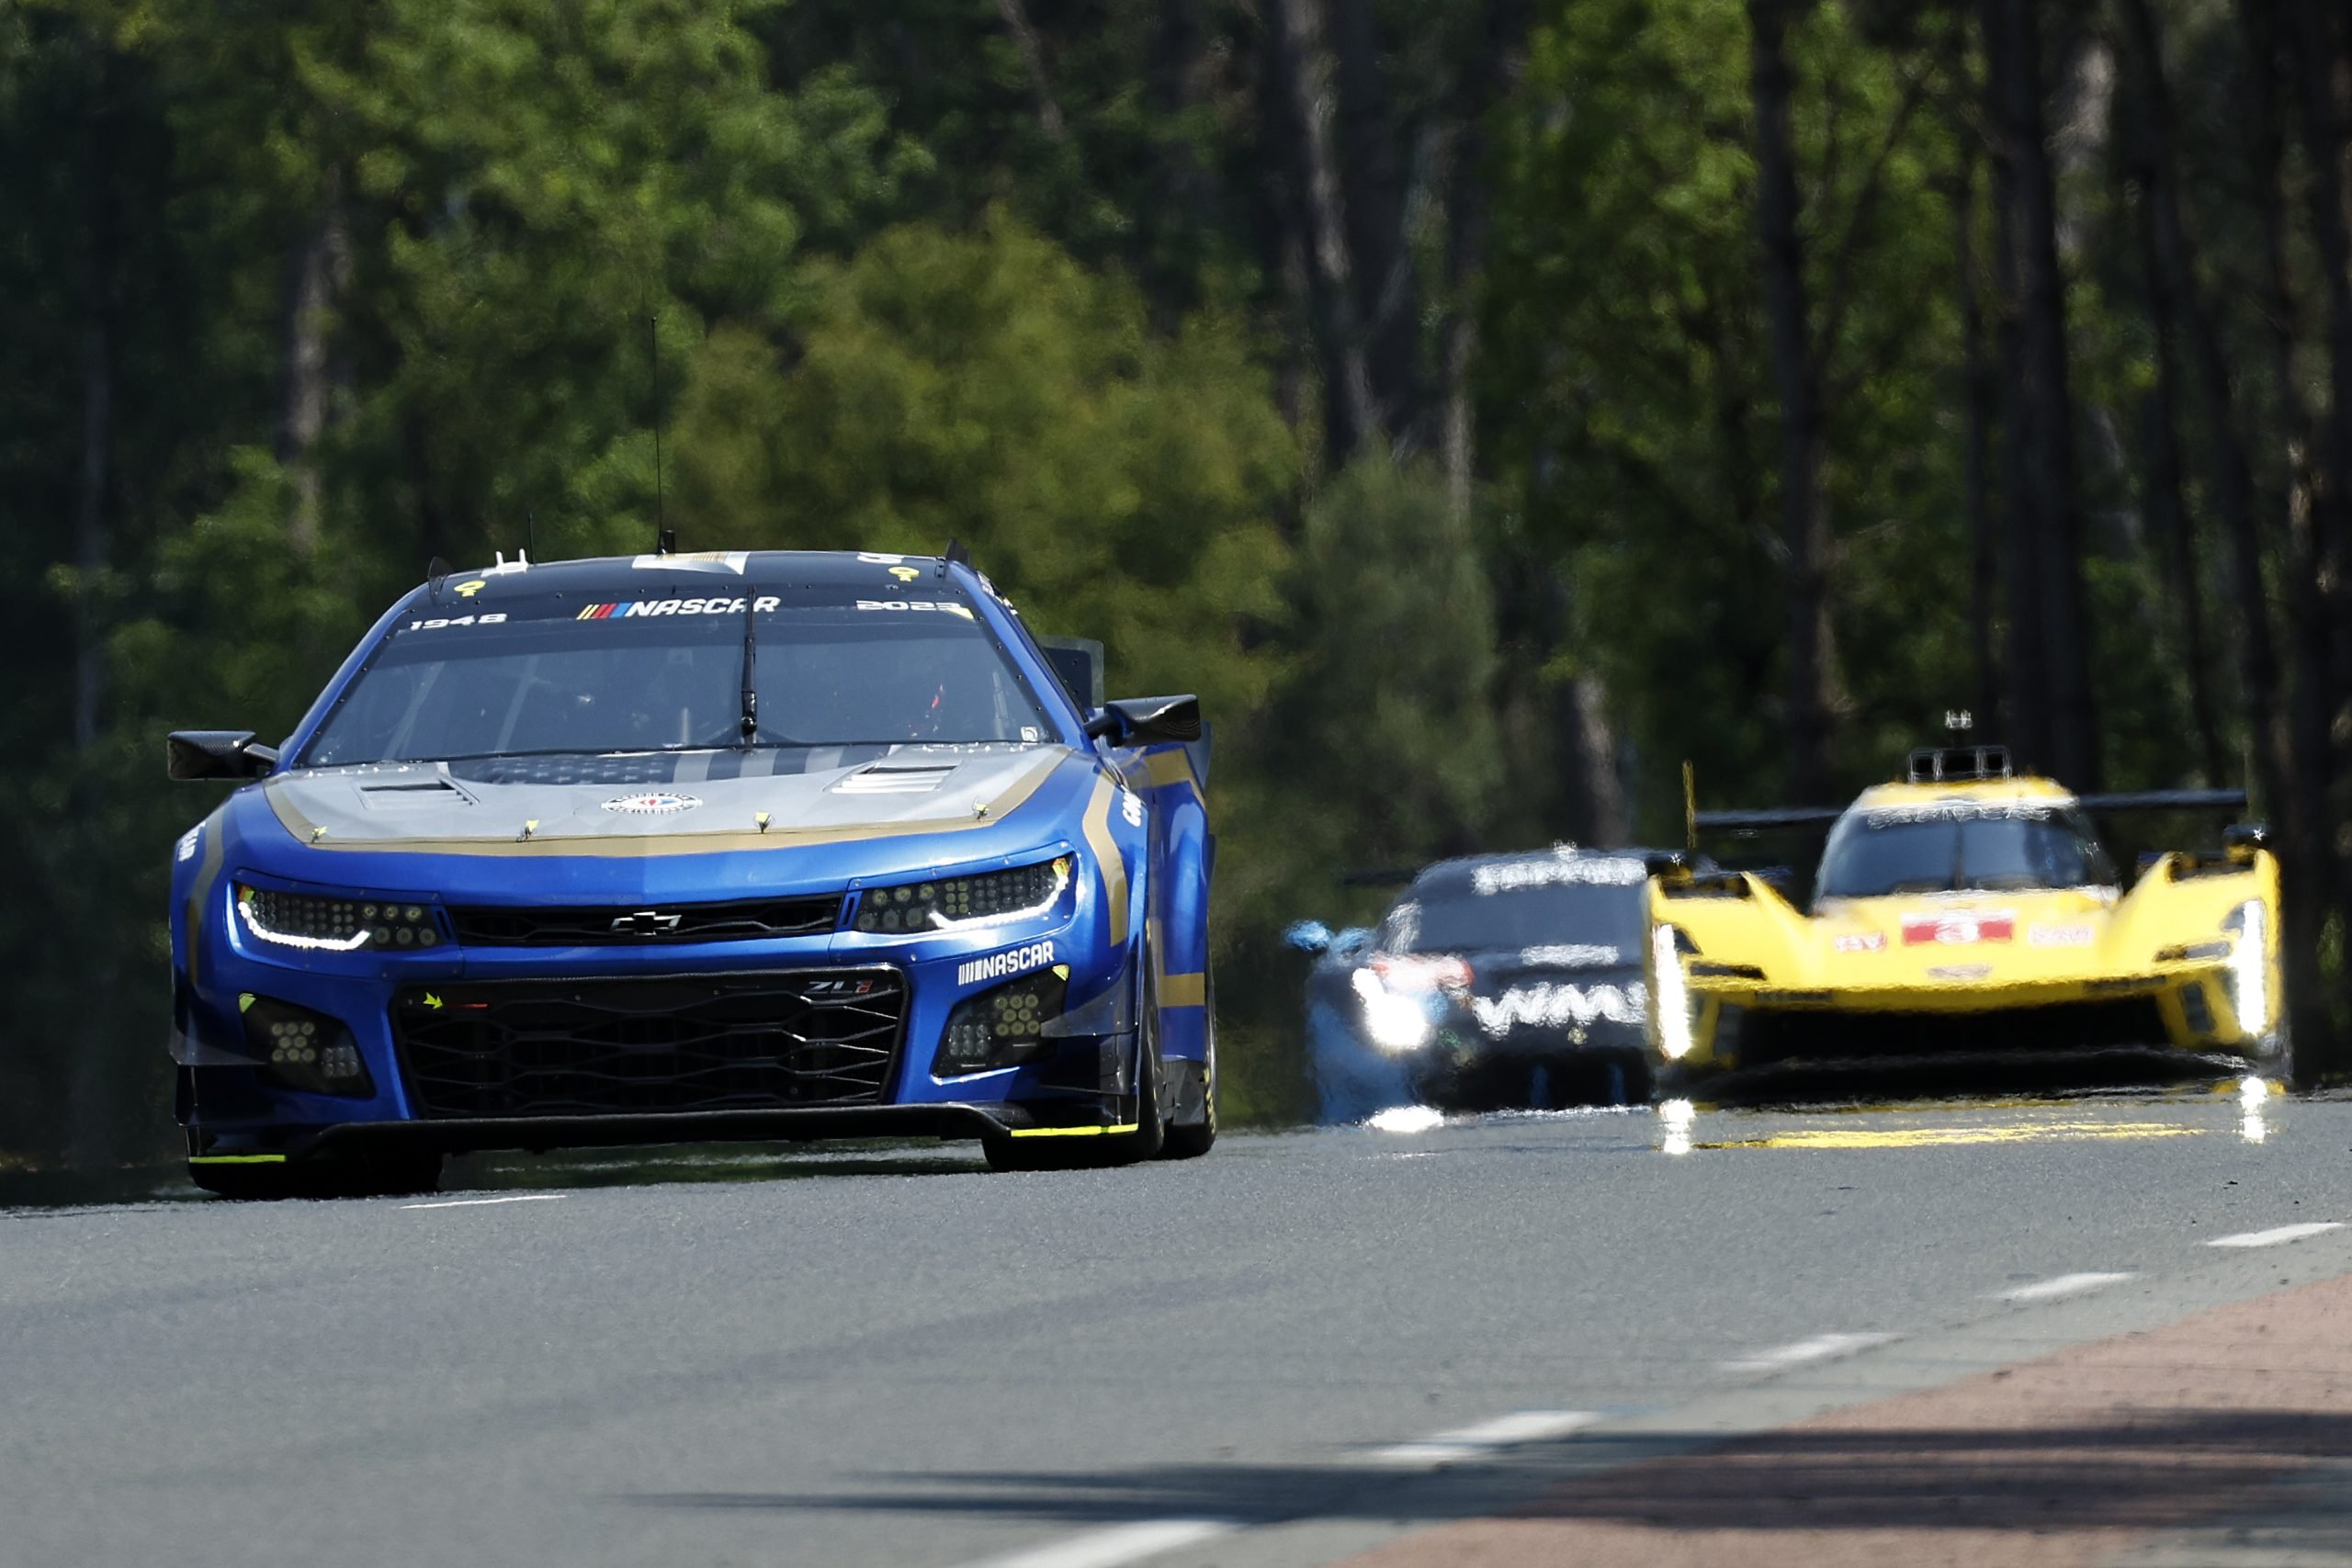 NASCAR Next Gen car takes on 24 Hours of Le Mans race in France